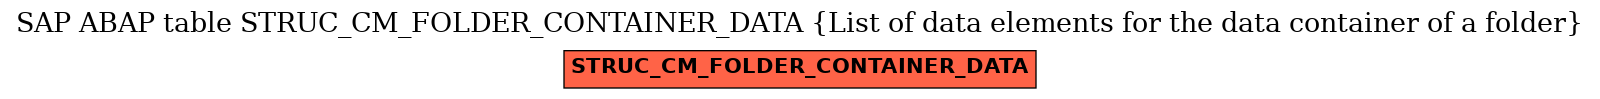 E-R Diagram for table STRUC_CM_FOLDER_CONTAINER_DATA (List of data elements for the data container of a folder)